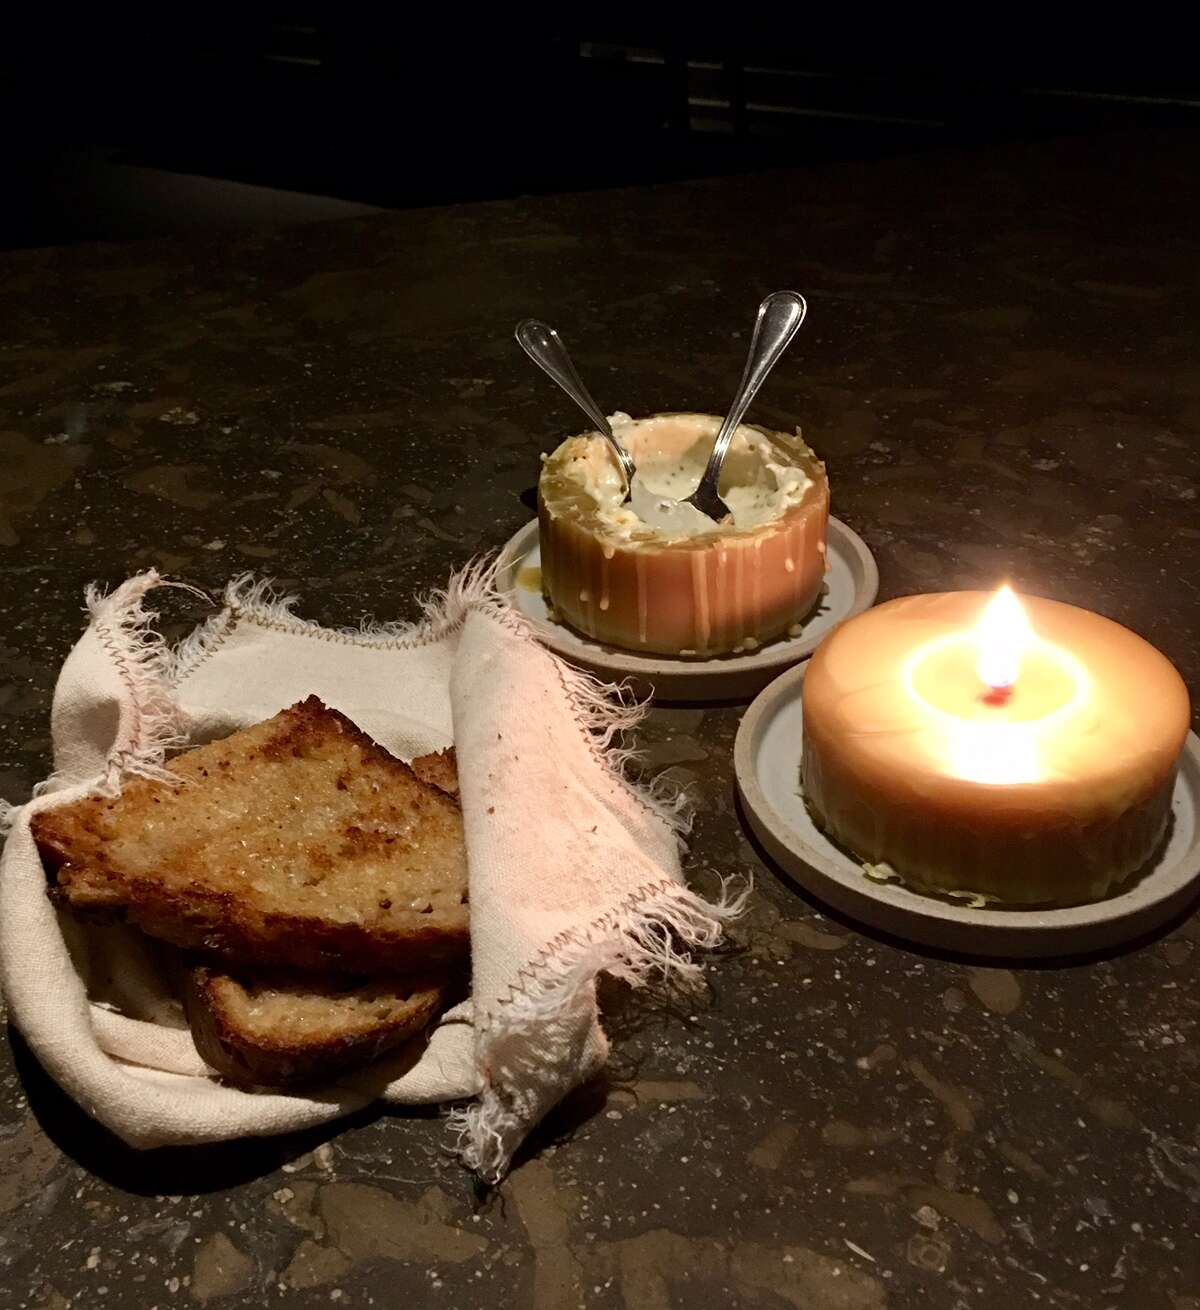 Restaurant at Meadowood, St. Helena: One of the most surprising courses is the cheese that's locked inside a candle. The waiter cuts the candle in two to reveal the creamy warm cheese.